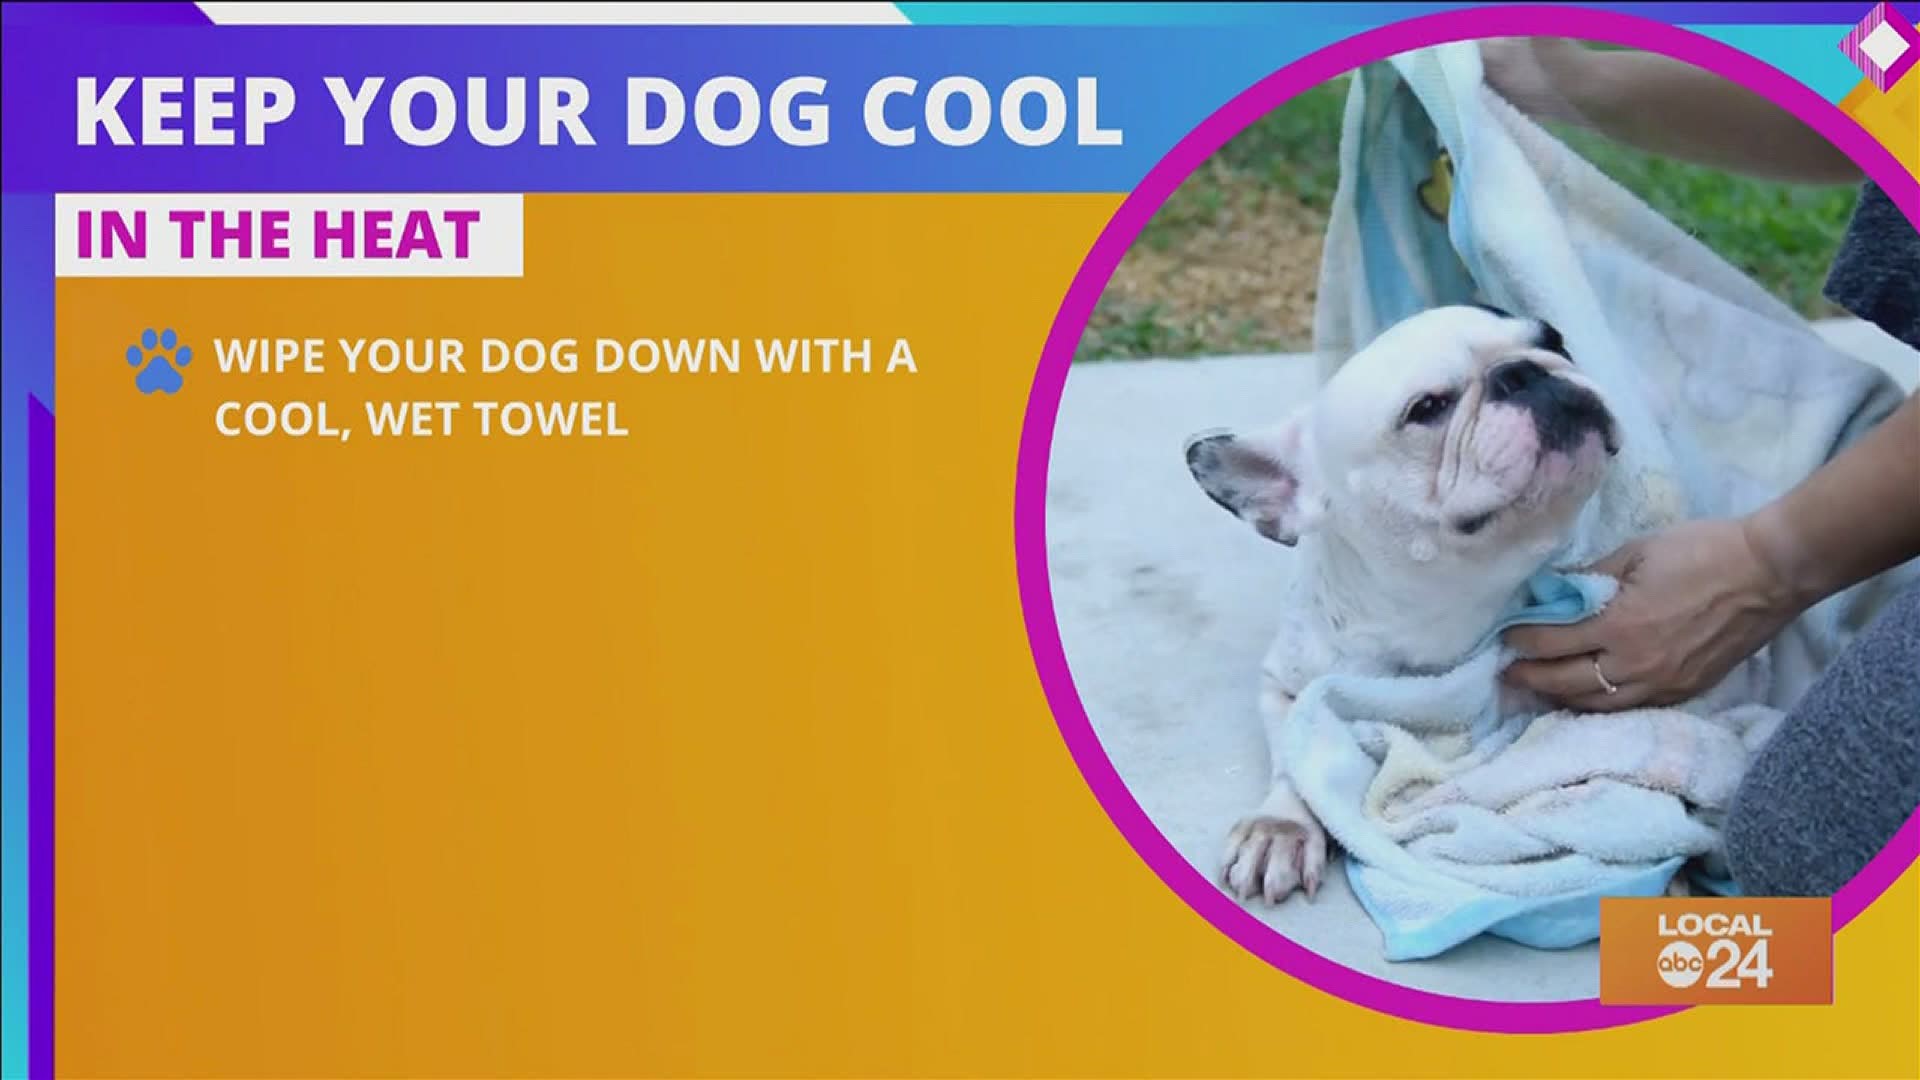 Did you know that dogs also suffer from heatstroke? Join Sydney Neely on "The Shortcut" to learn how you can keep your dog cool this summer!